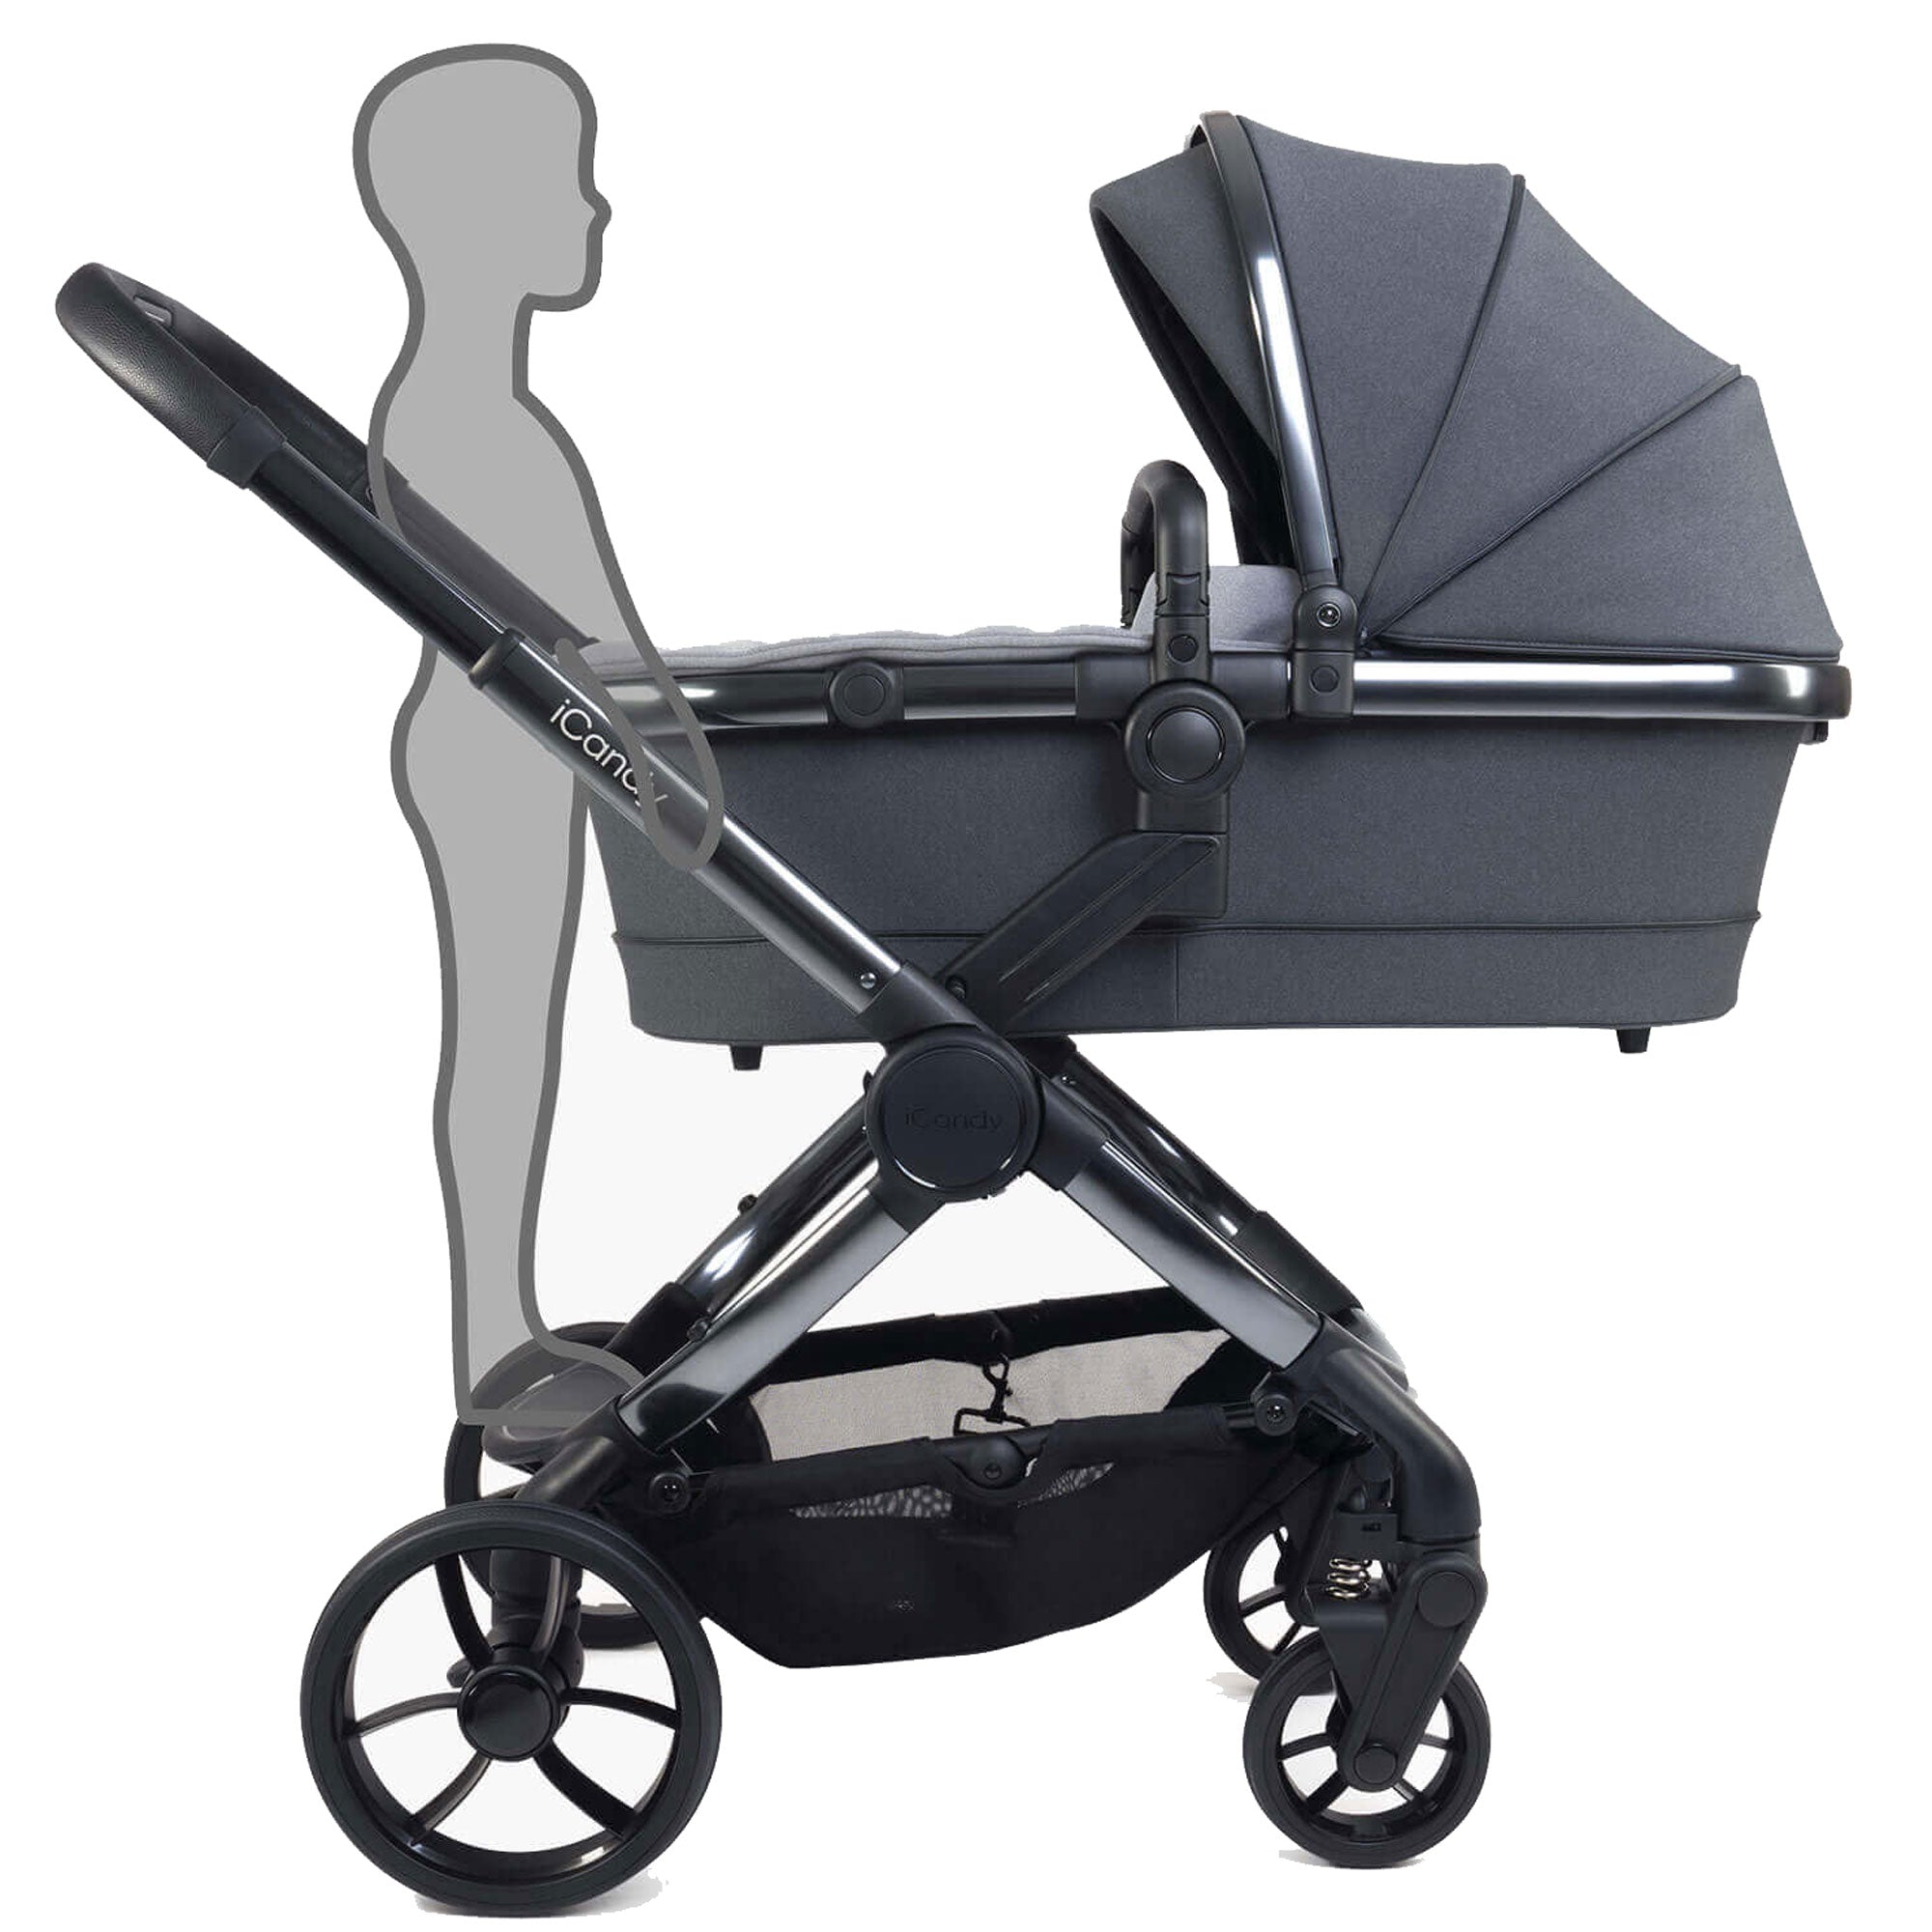 iCandy Peach 7 Complete Cybex Bundle in Truffle